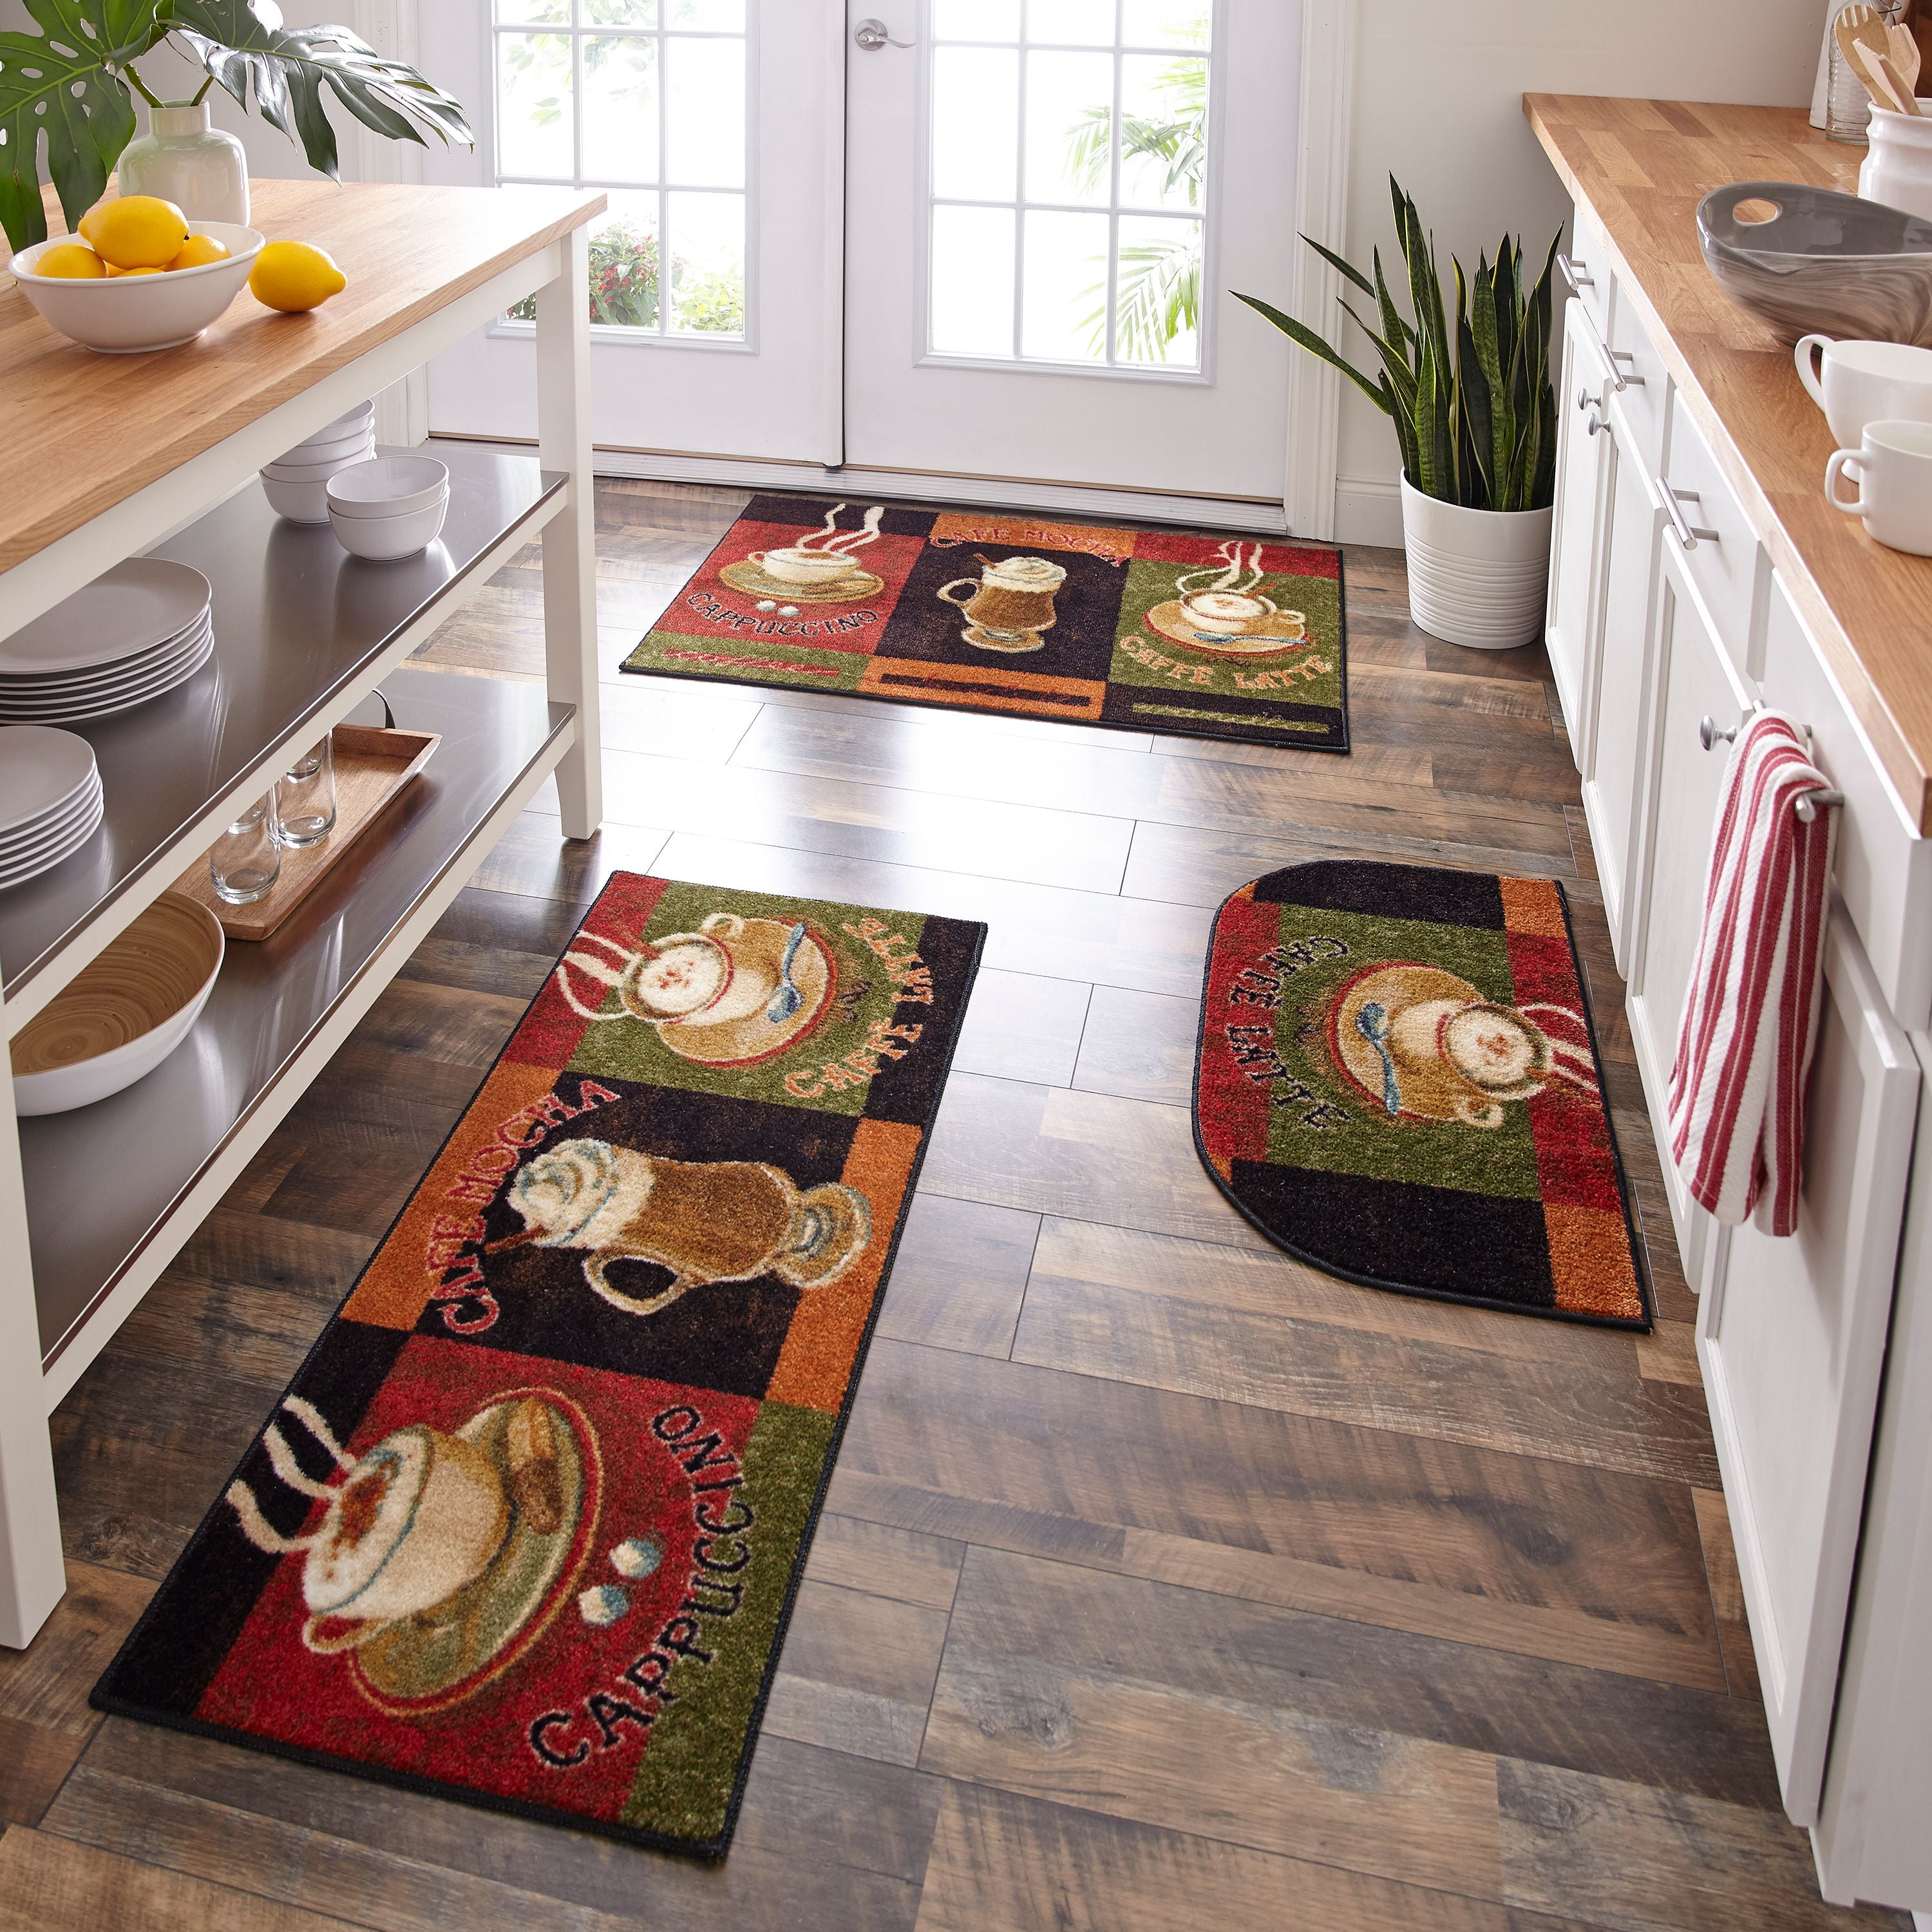 Mohawk Home New Wave Caffe Latte Primary Kitchen Mat, Set of 3, Multiple Sizes